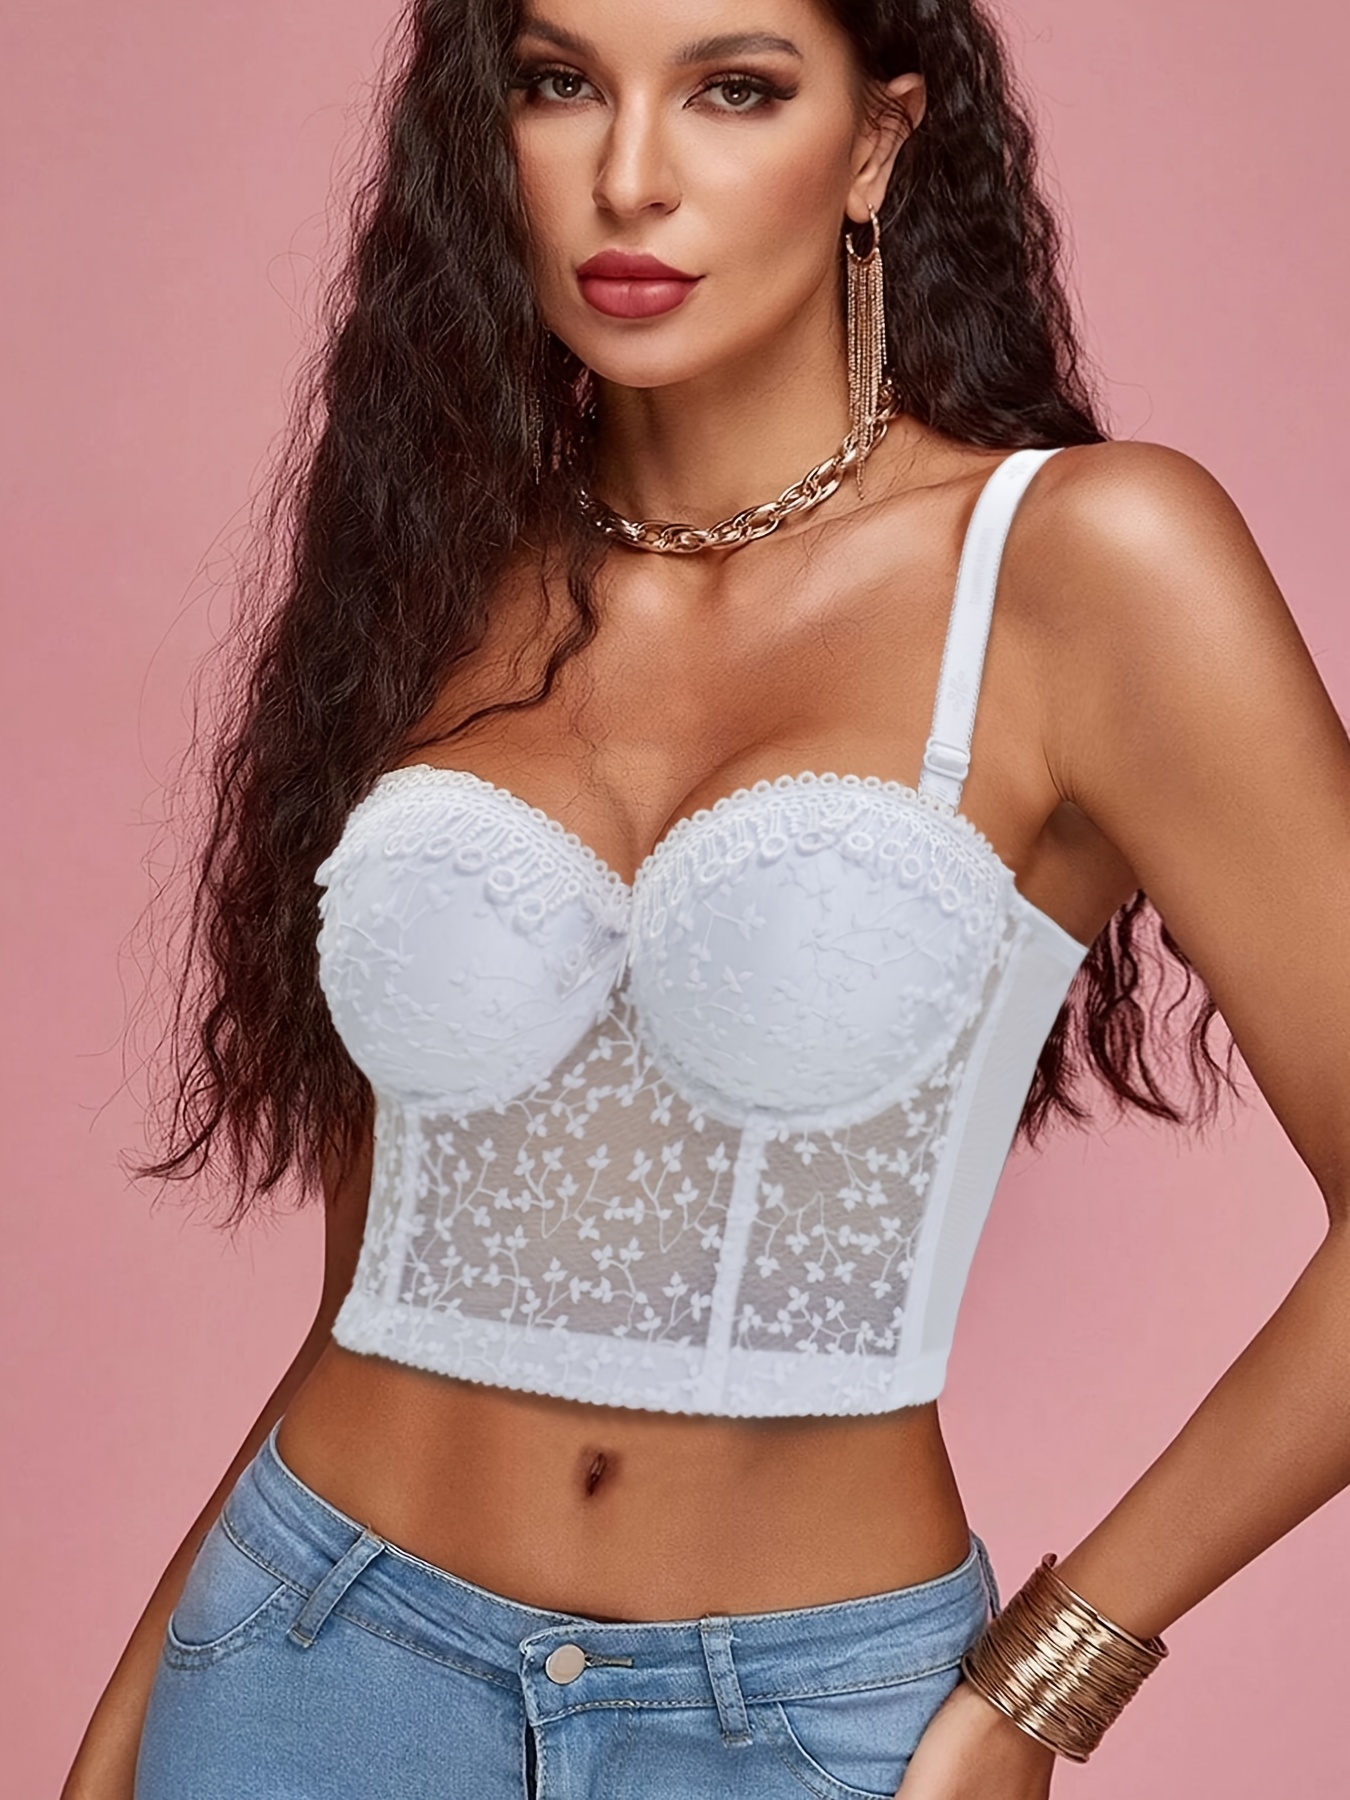 Black and White Embroidered Bra Top Half Corset Crop Top Bustier. 